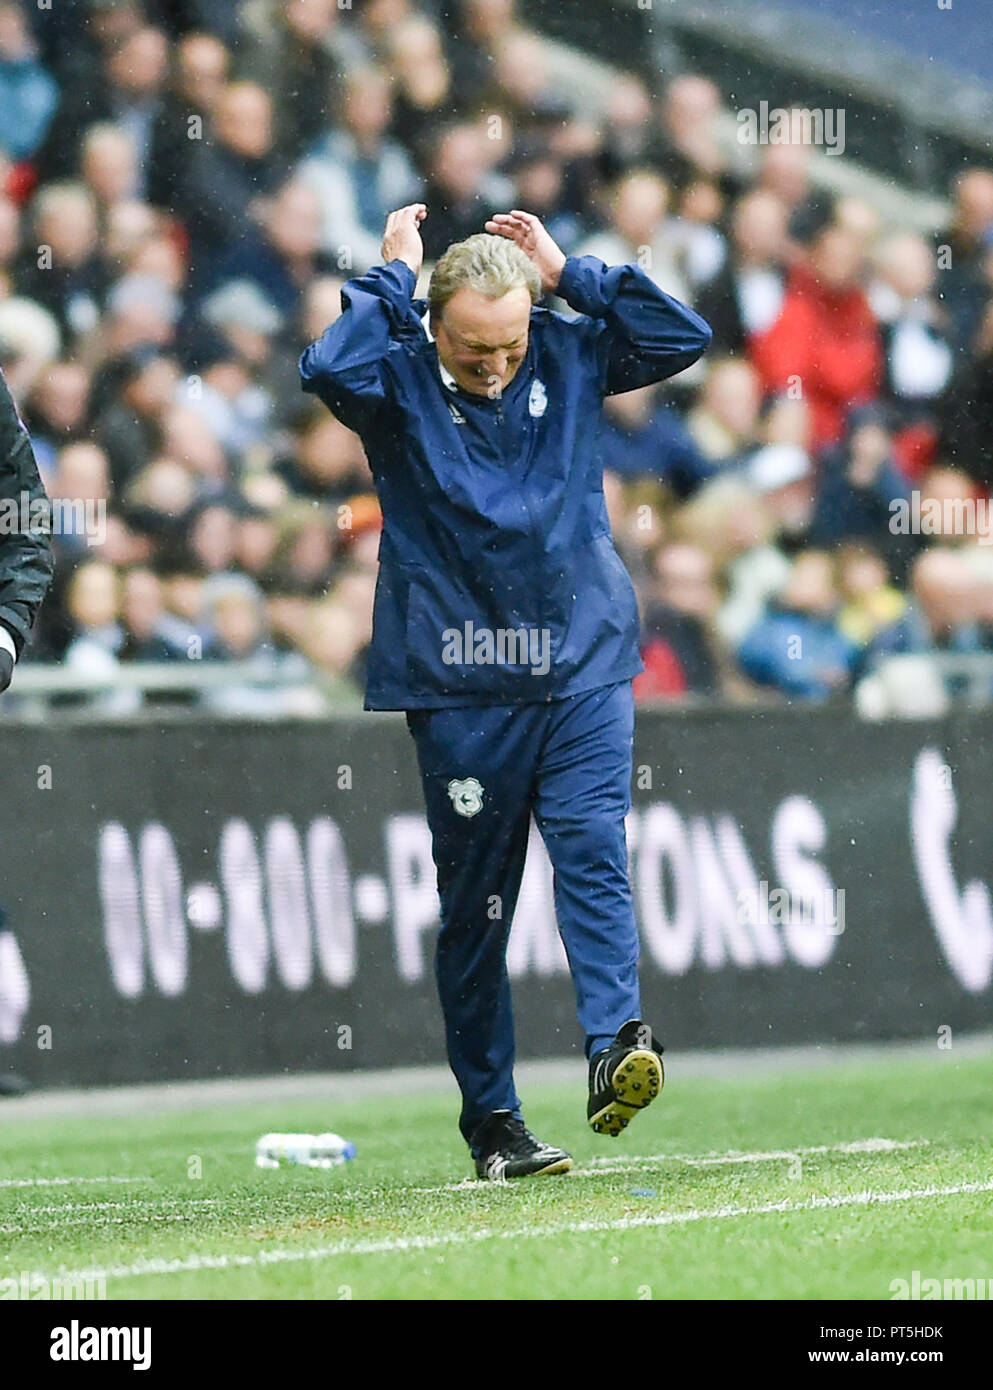 Cardiffs Manager  Neil Warnock shows his frustration during the Premier League match between Tottenham Hotspur and Cardiff City at Wembley Stadium , London , 06 October 2018 Editorial use only. No merchandising. For Football images FA and Premier League restrictions apply inc. no internet/mobile usage without FAPL license - for details contact Football Dataco Stock Photo